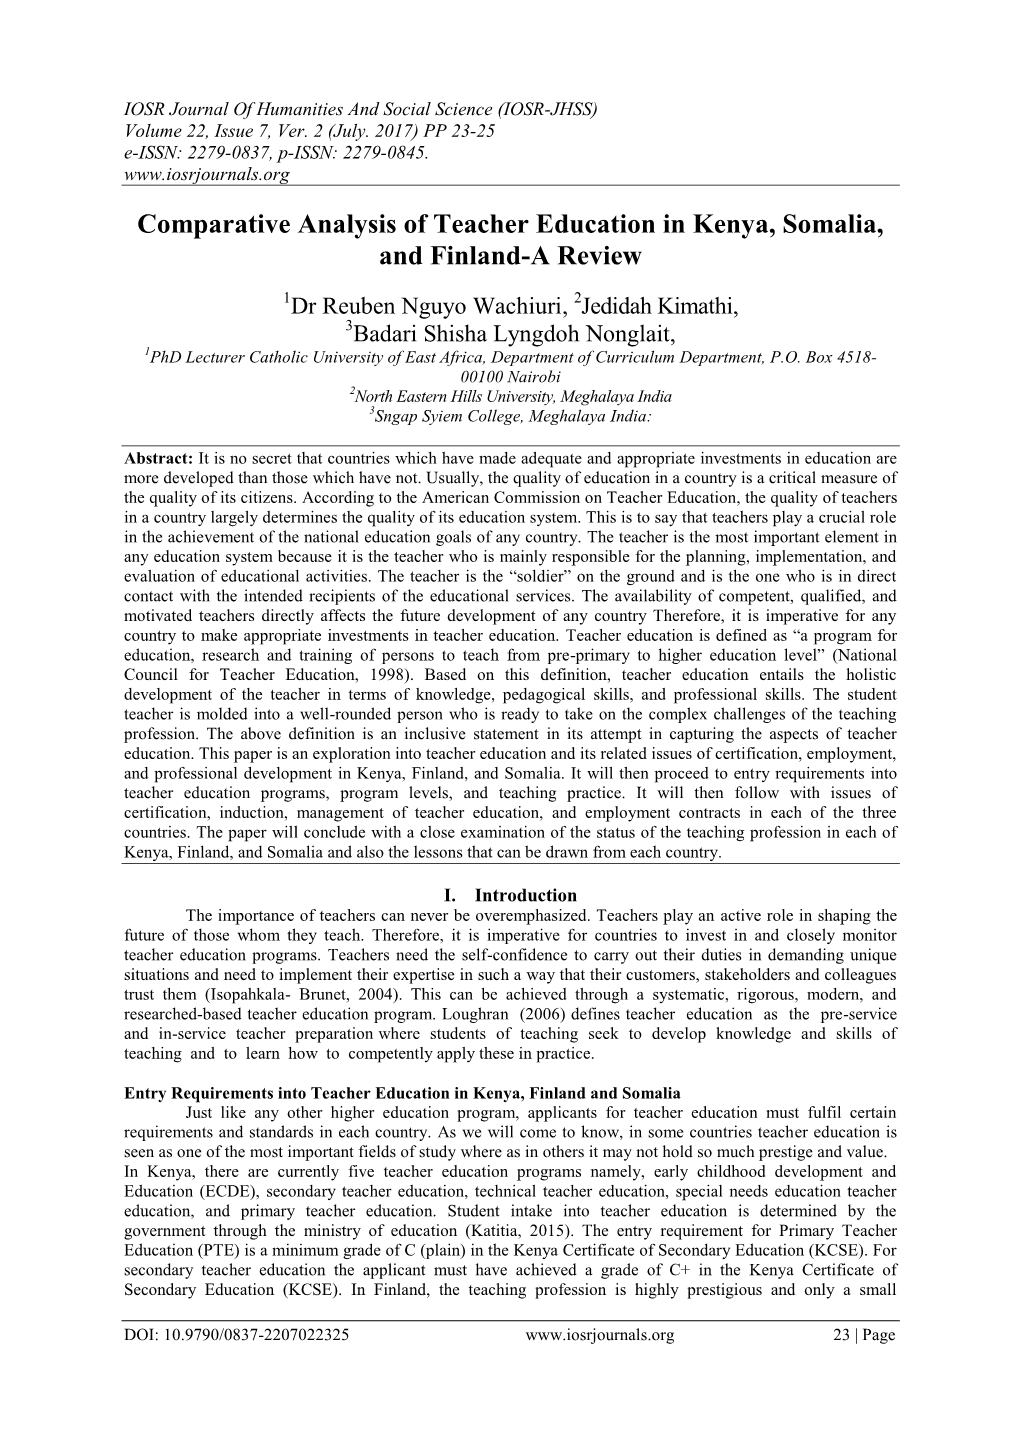 Comparative Analysis of Teacher Education in Kenya, Somalia, and Finland-A Review